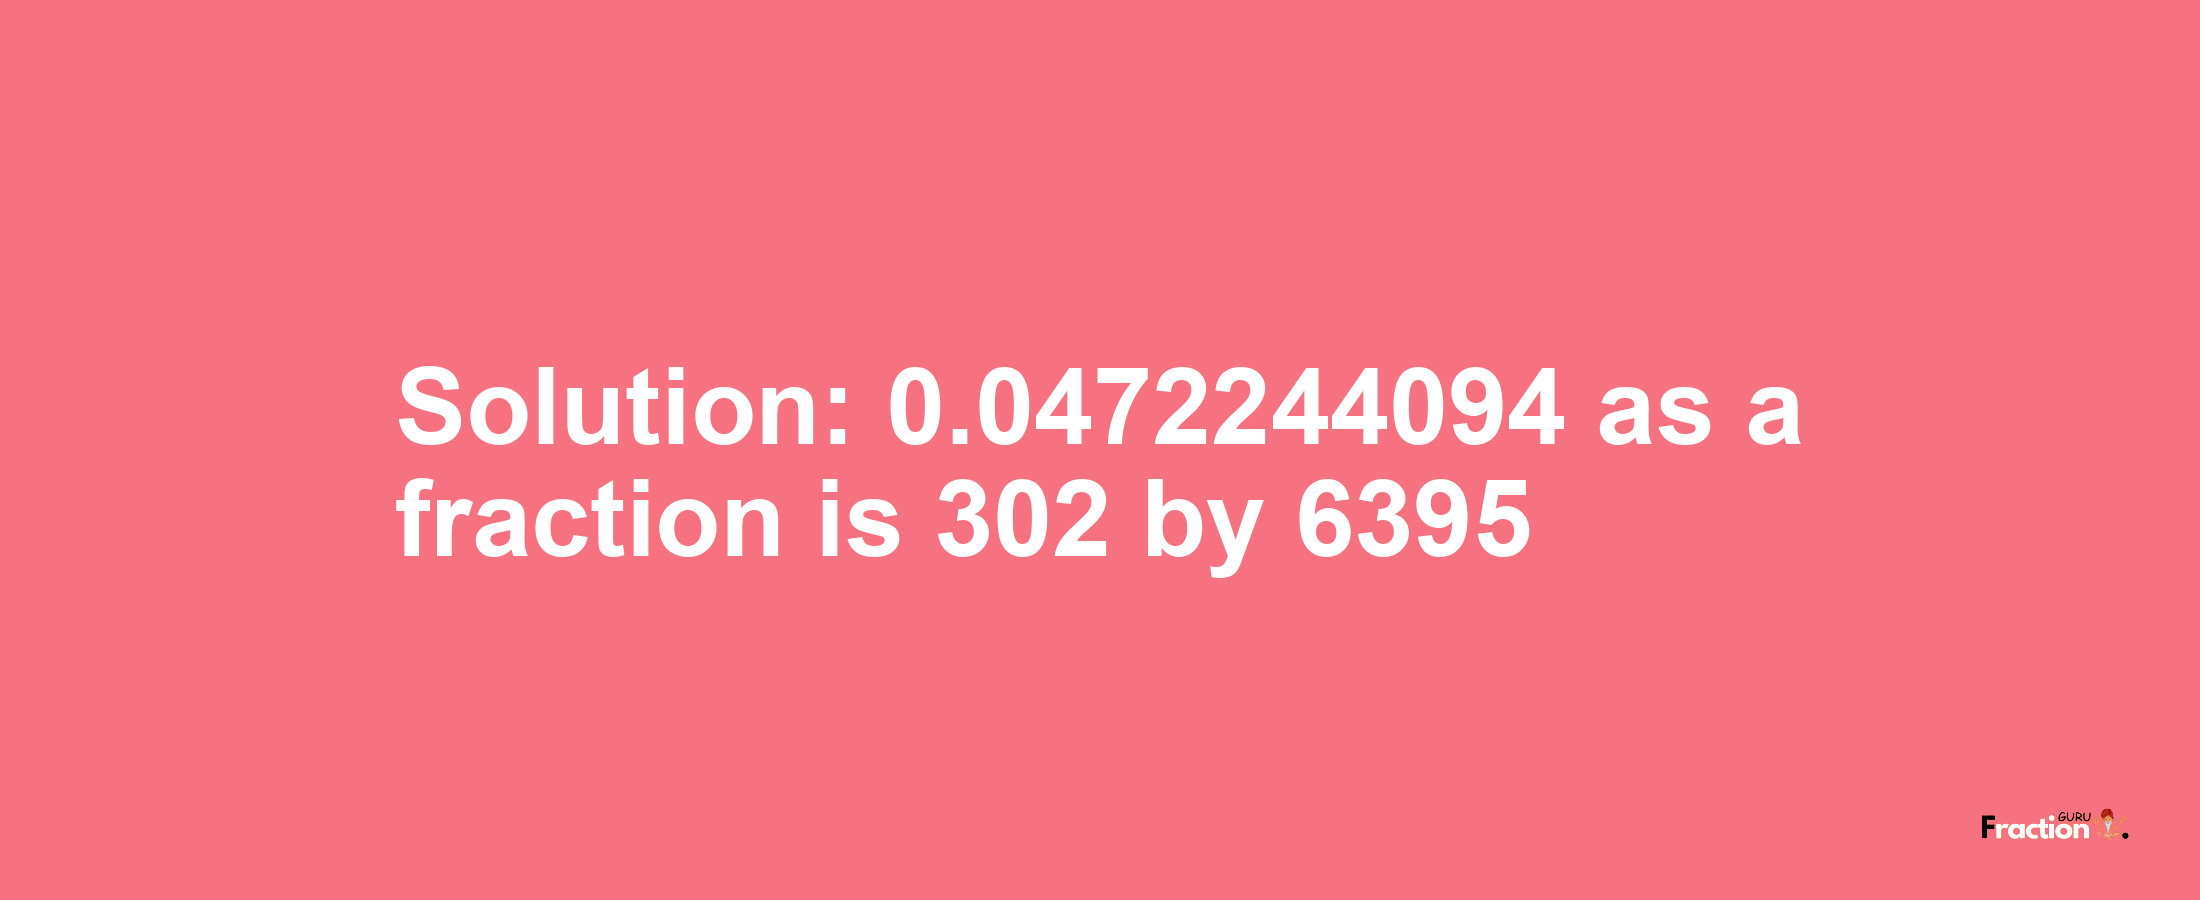 Solution:0.0472244094 as a fraction is 302/6395